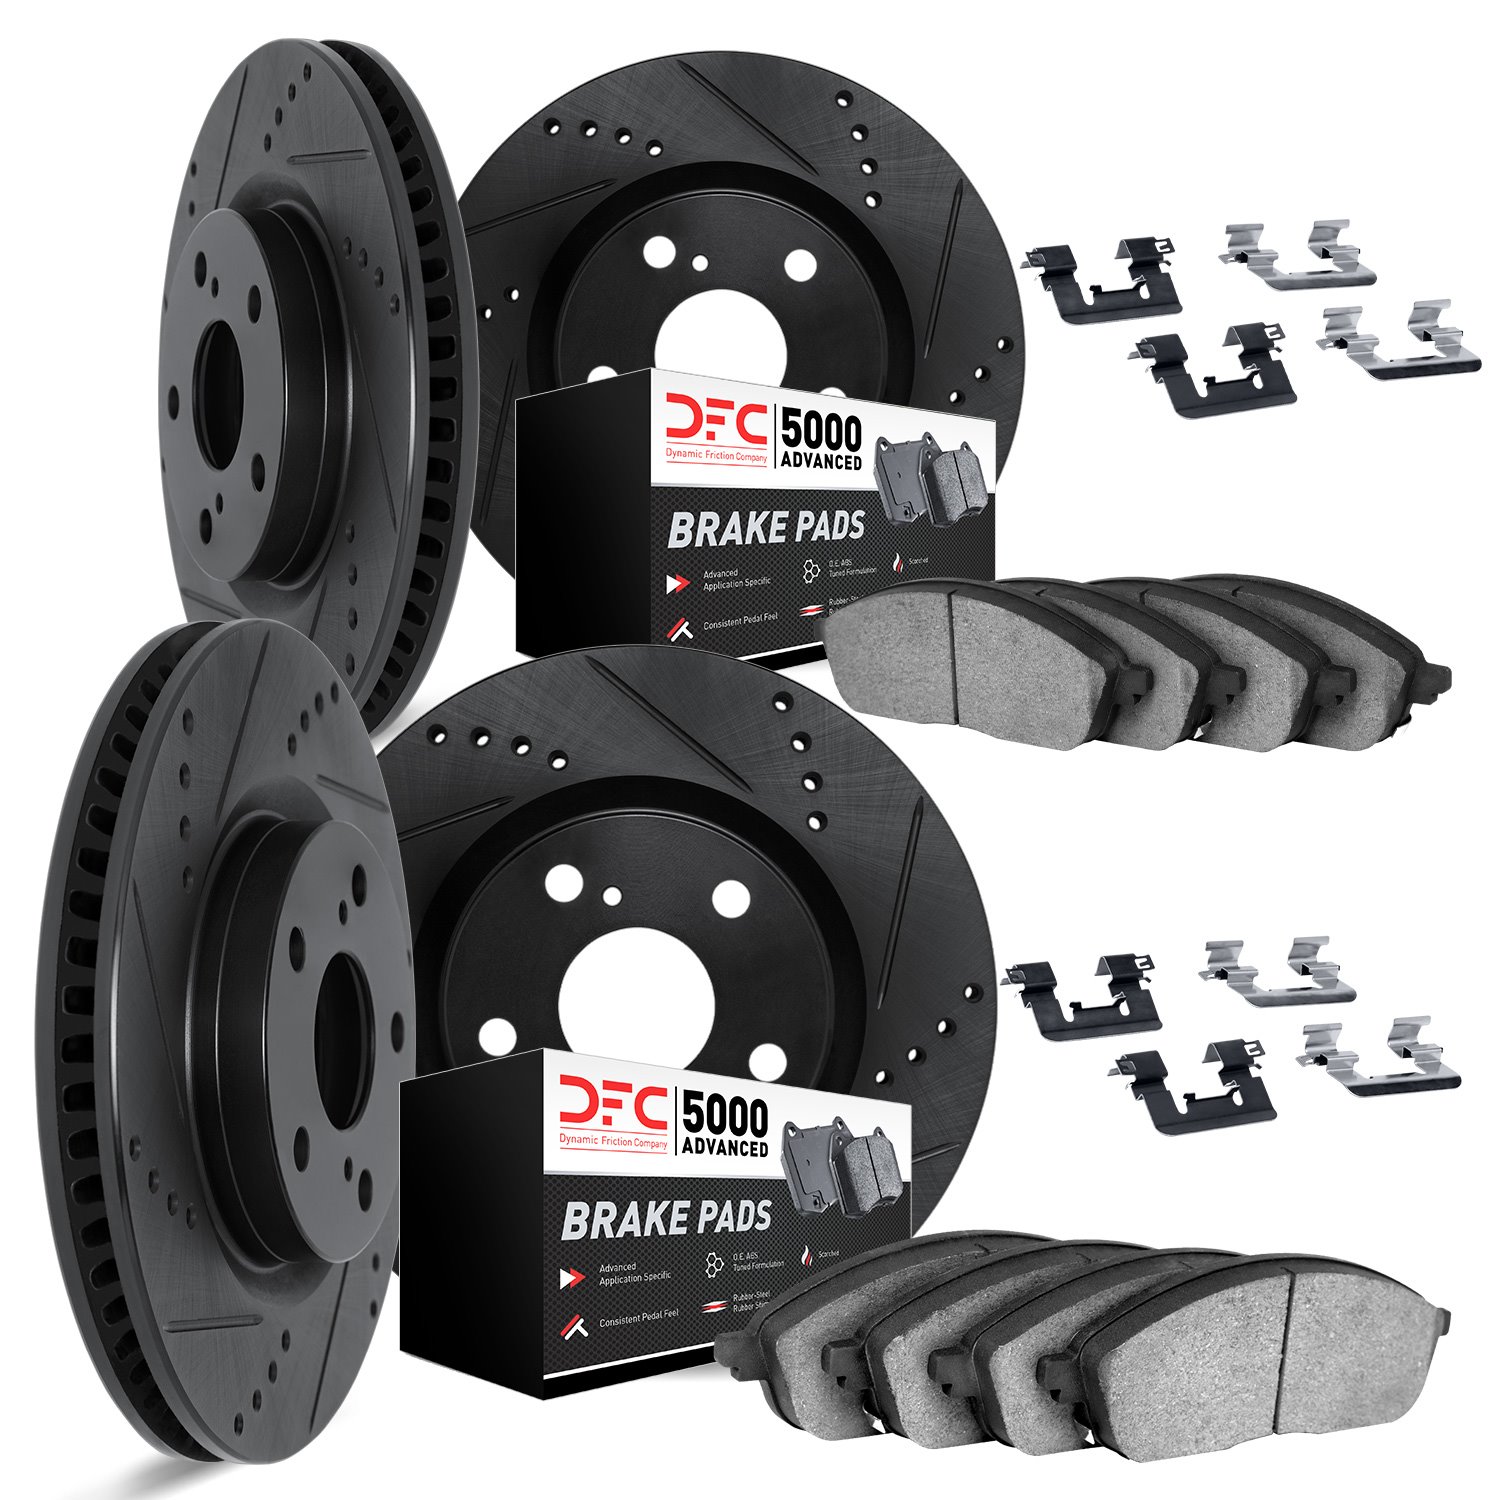 8514-31017 Drilled/Slotted Brake Rotors w/5000 Advanced Brake Pads Kit & Hardware [Black], 2008-2011 BMW, Position: Front and Re